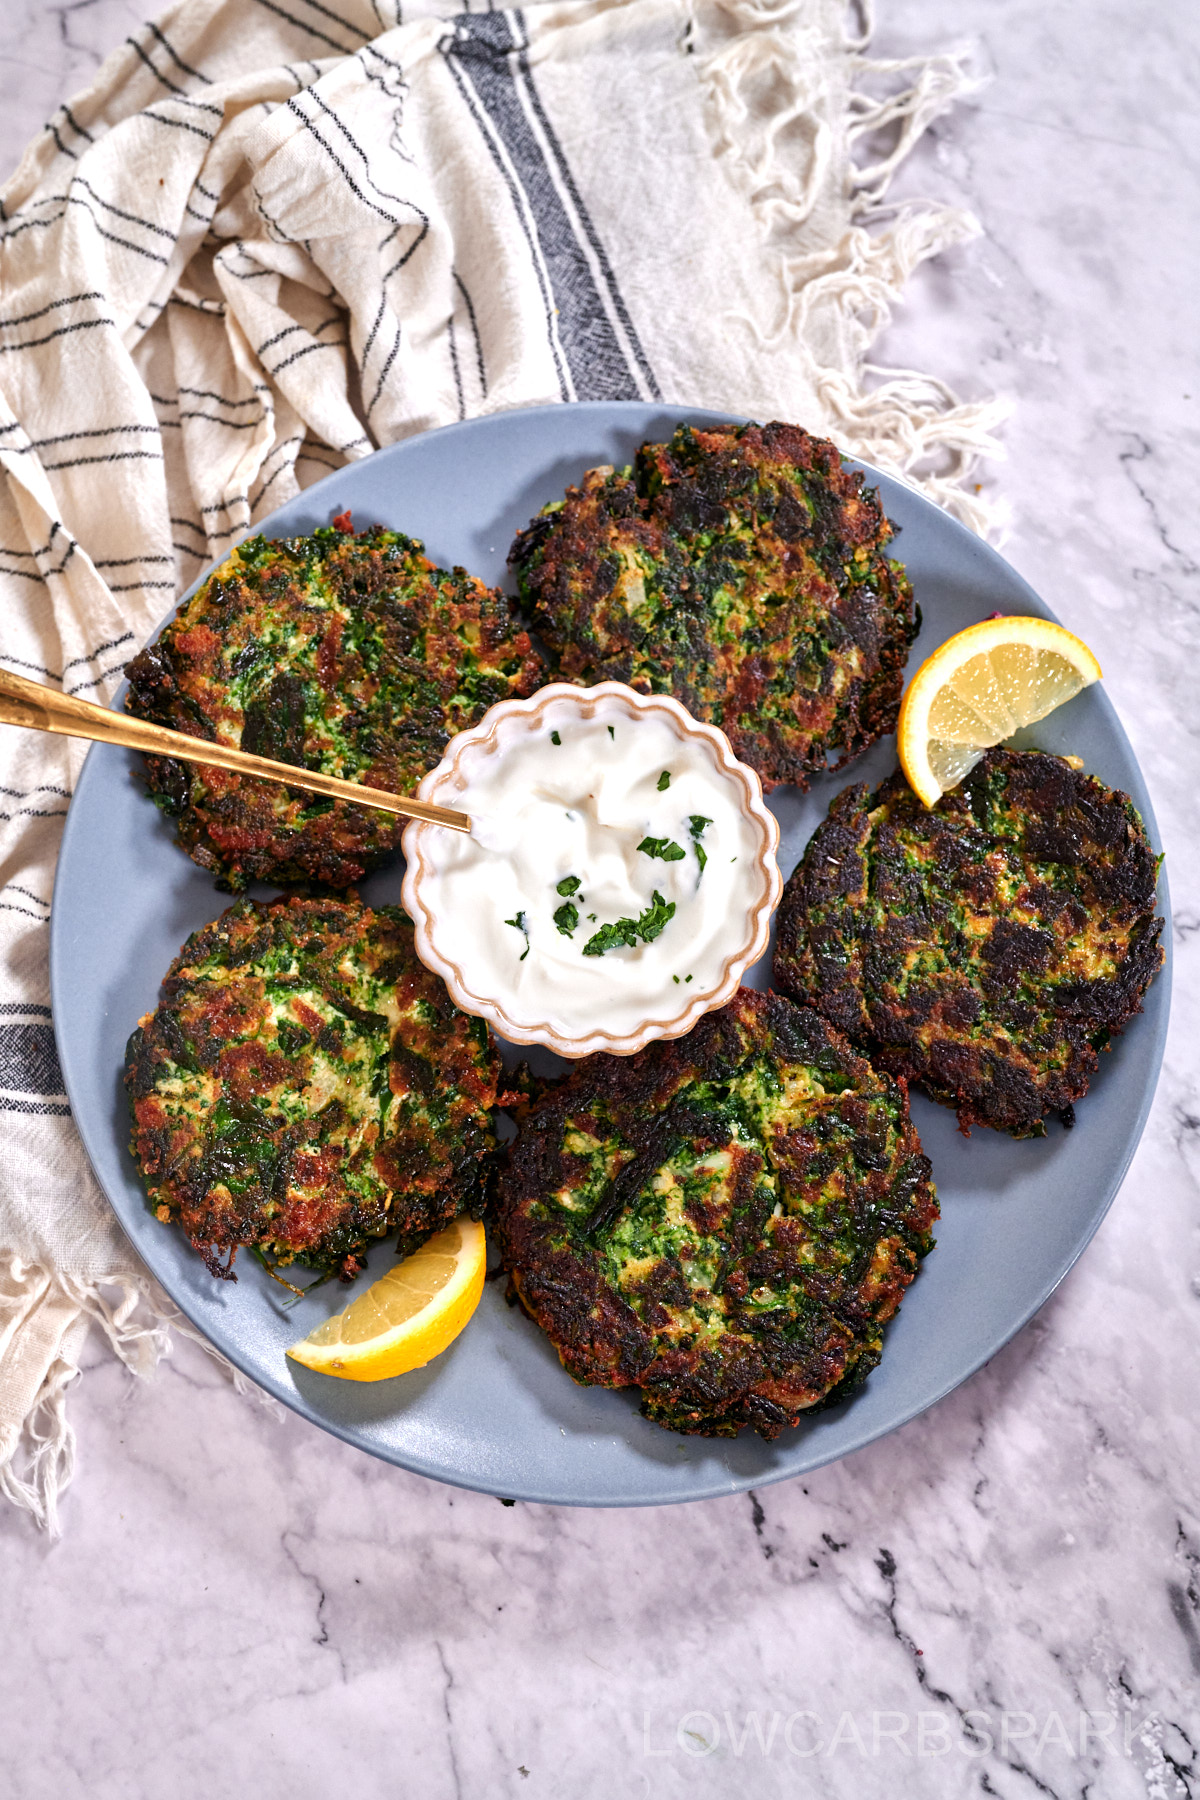 Crispy Spinach Fritters